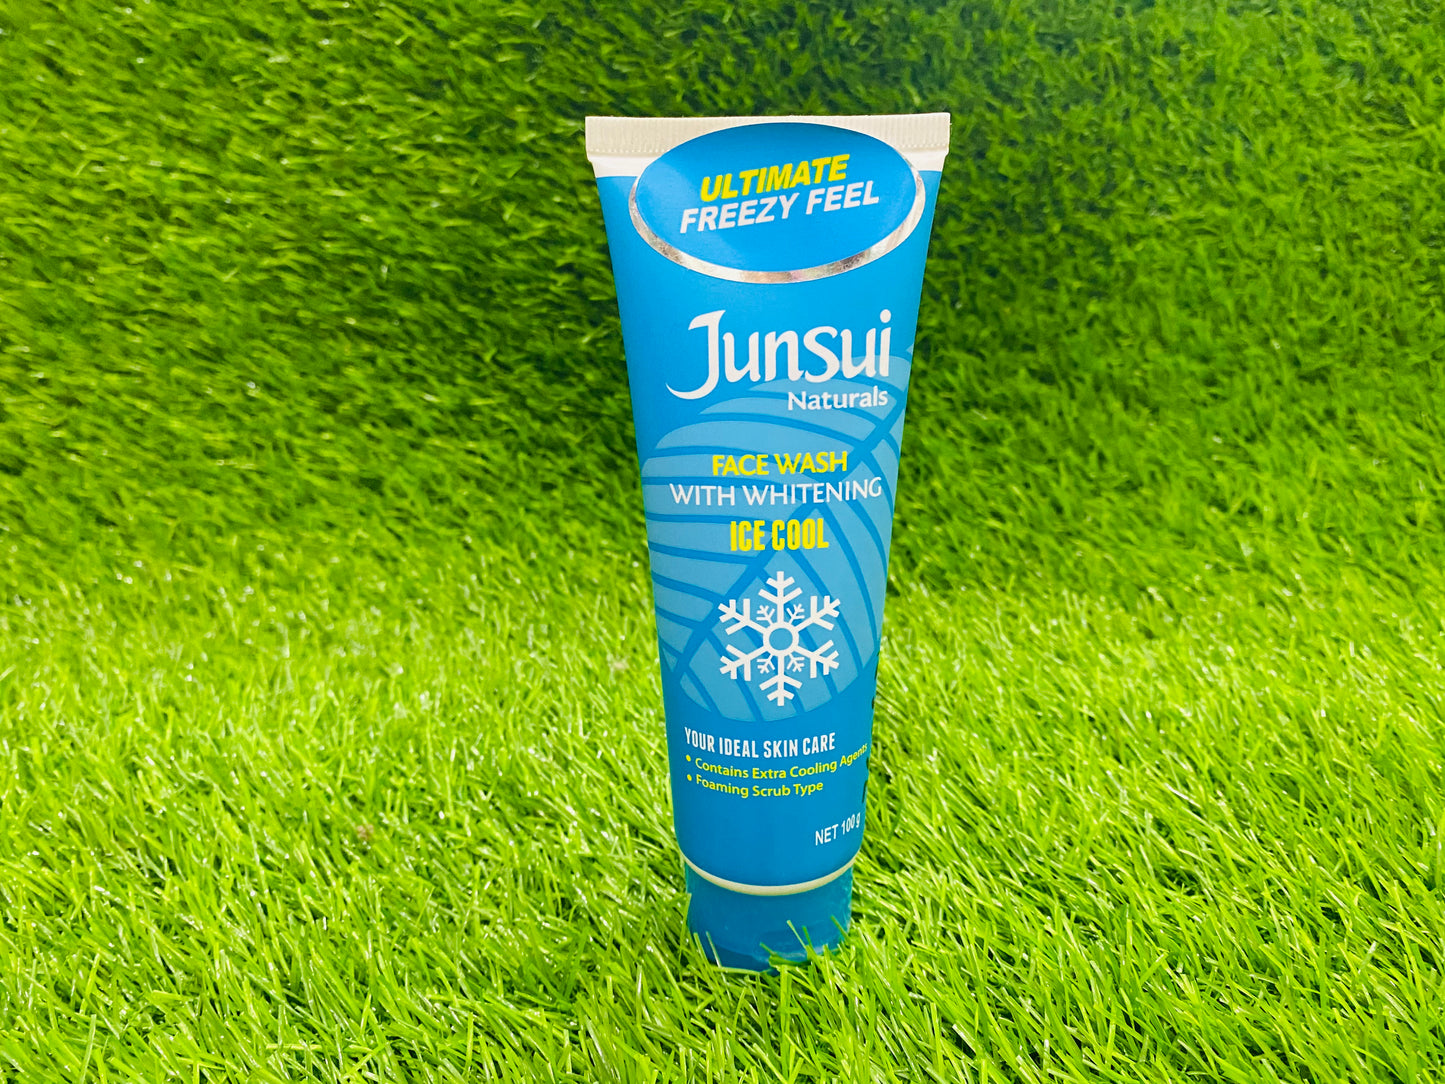 JUNSUI FACE WASH ICE COOL WHITENING